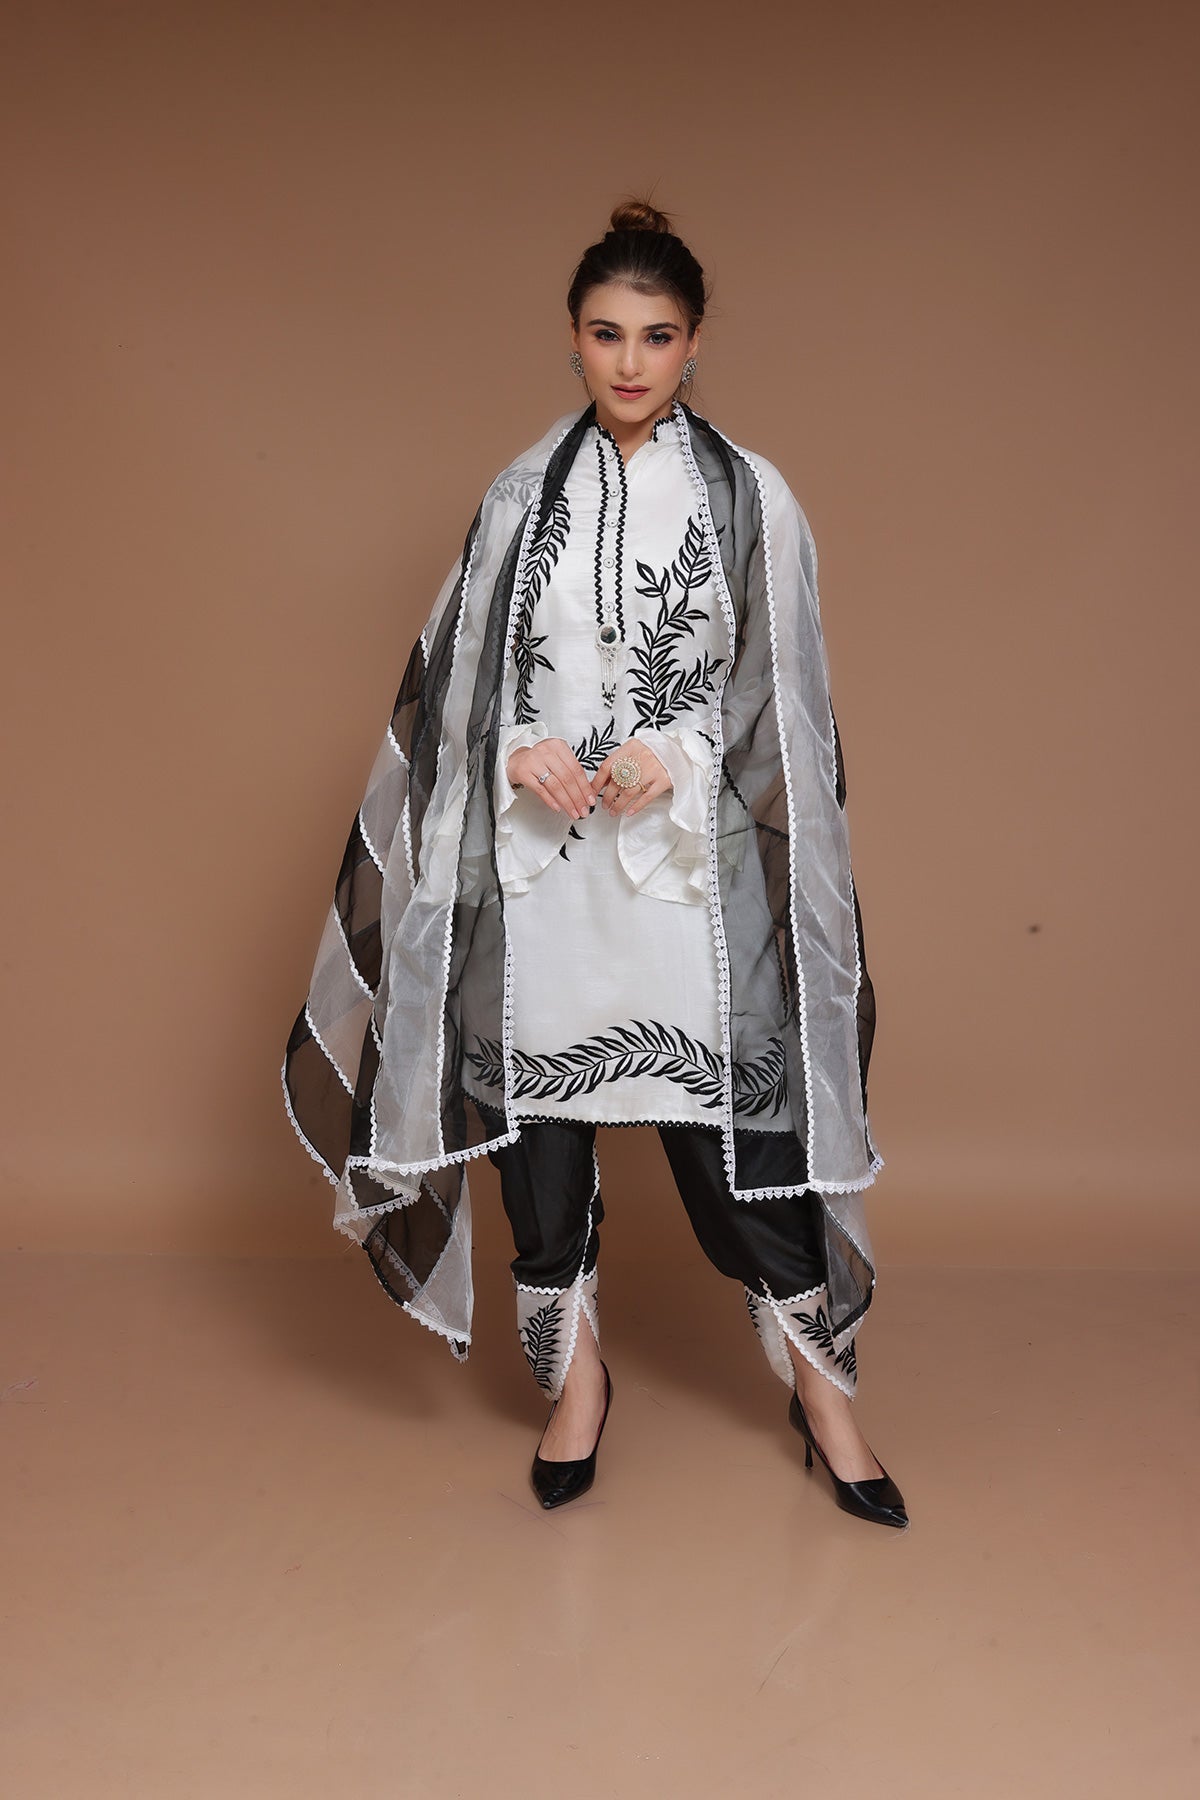 Black & White tulip Suit along with black and white striped organza dupatta